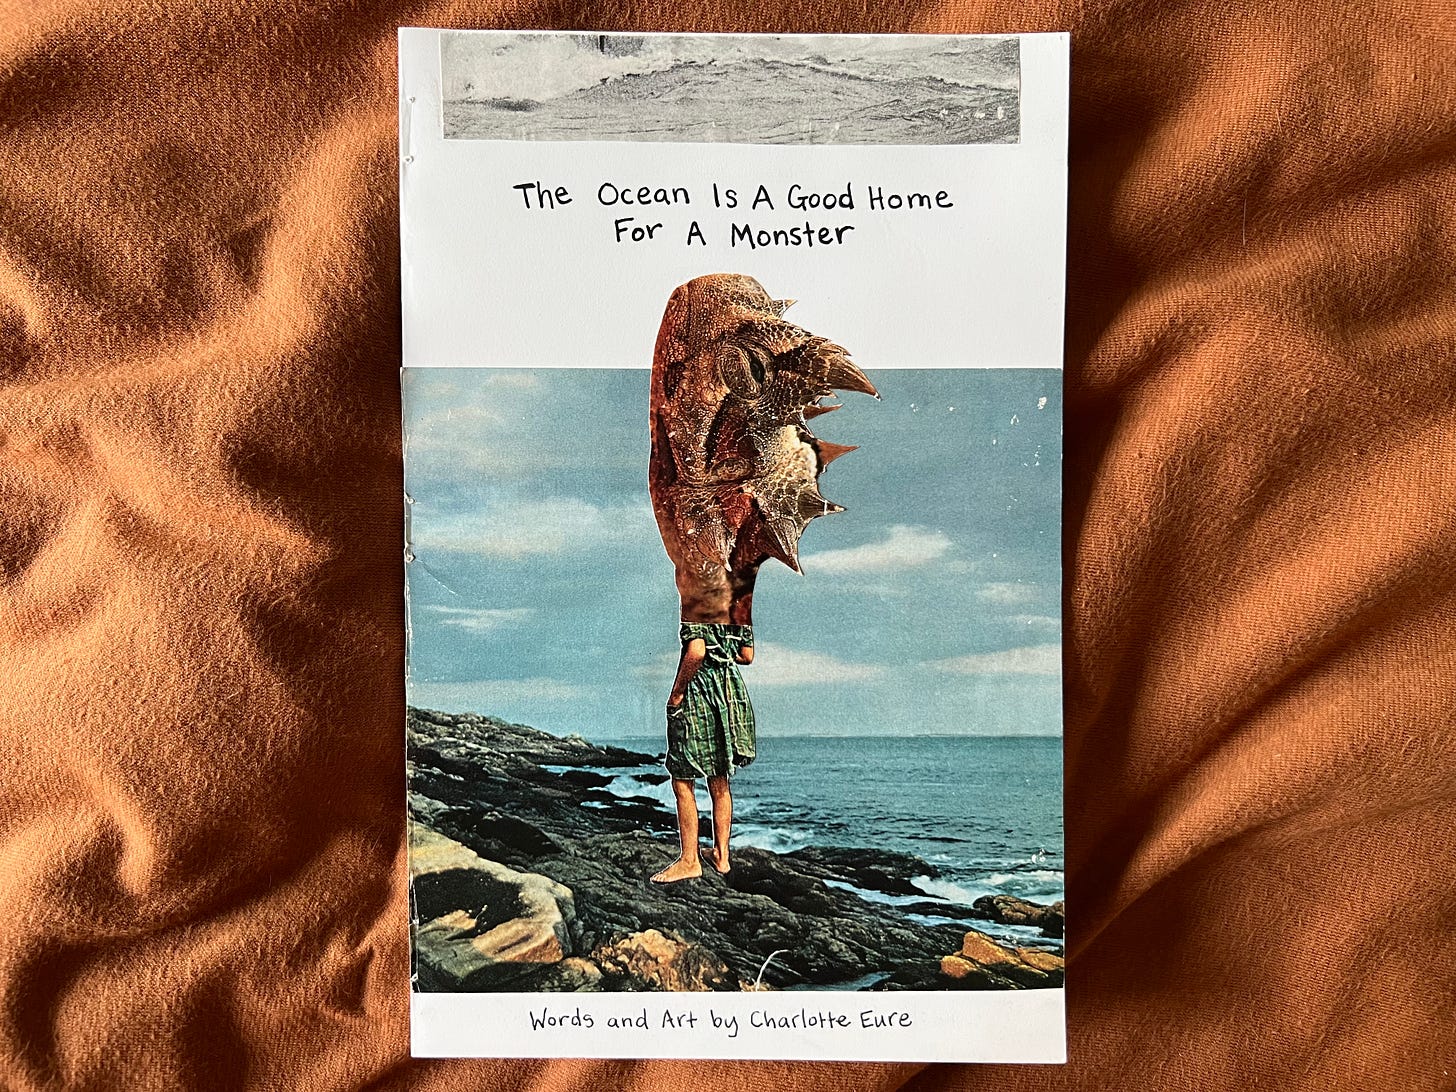 a comic cover with title "The Occean Is A Good Home For A Monster" and under the text is a collage of a person in a dress with some of giant lizard head. she is standing on rocks at the shore of the ocean.